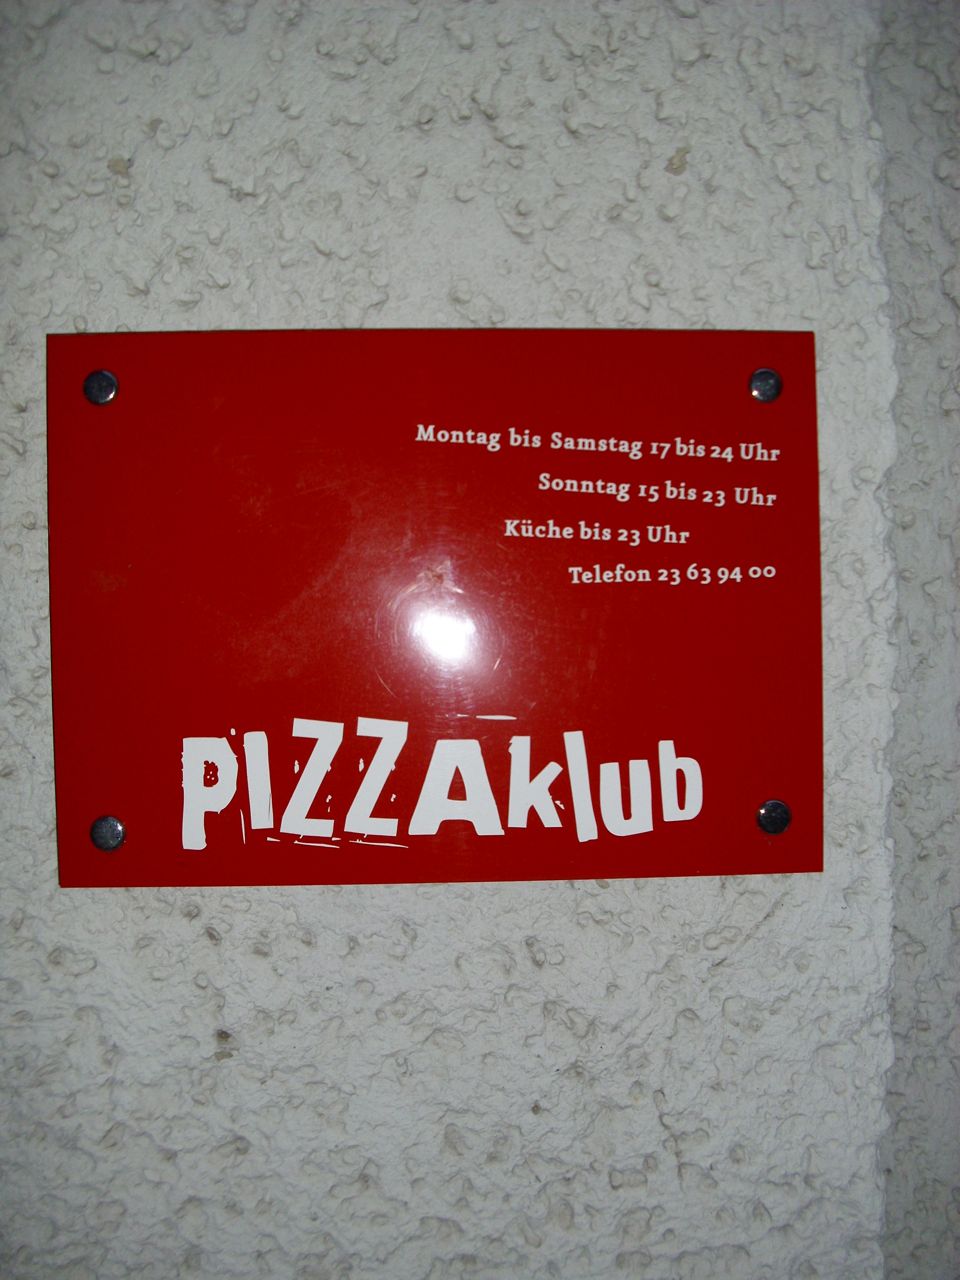 <!--:en-->The “Pizza Klub”darn good Pizza and easy on a fashionistas purse strings!!!!<!--:-->